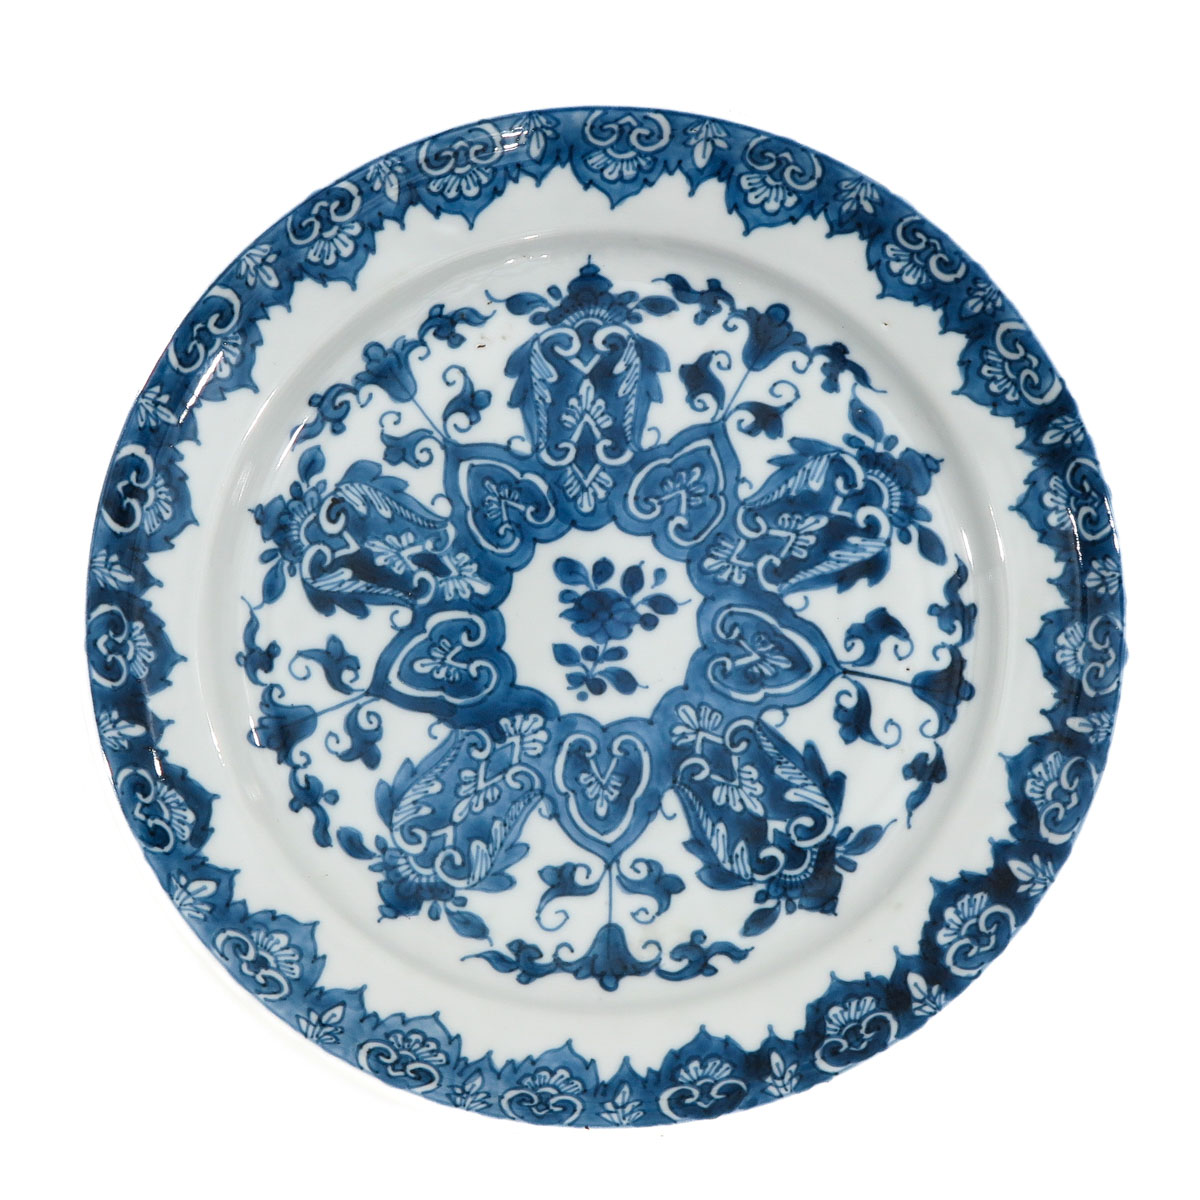 A Series of 5 Blue and White Plates - Image 7 of 10